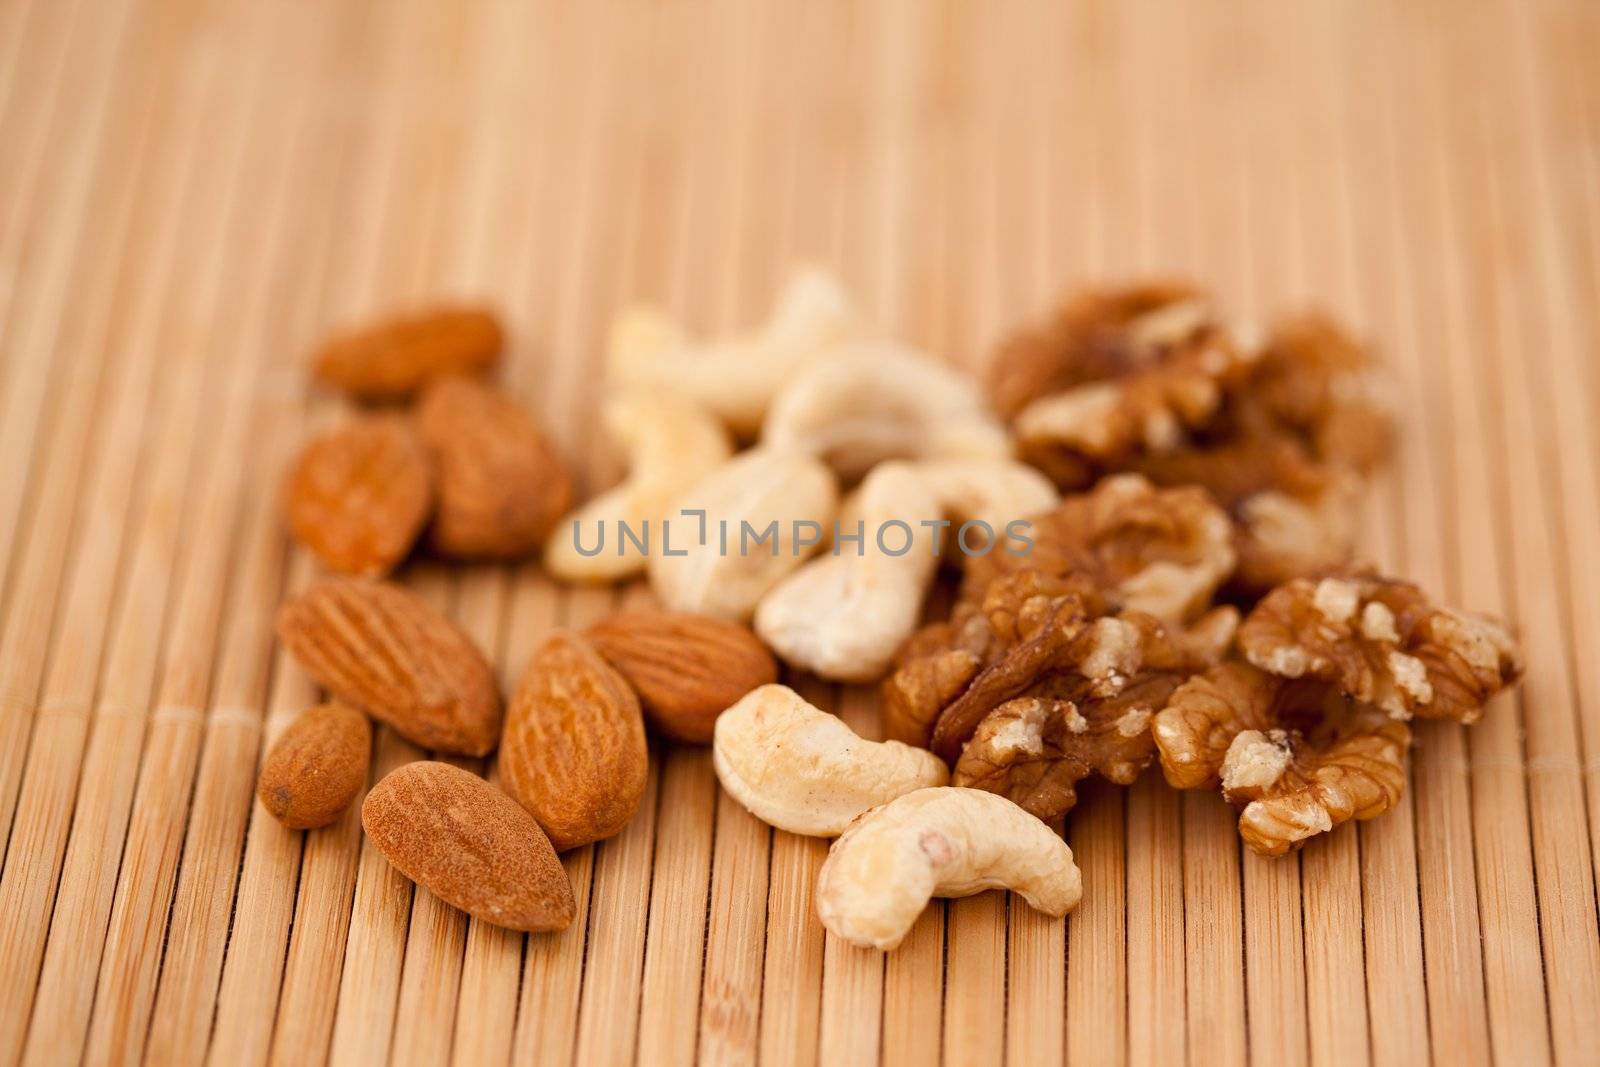 Nuts laid out together by Wavebreakmedia